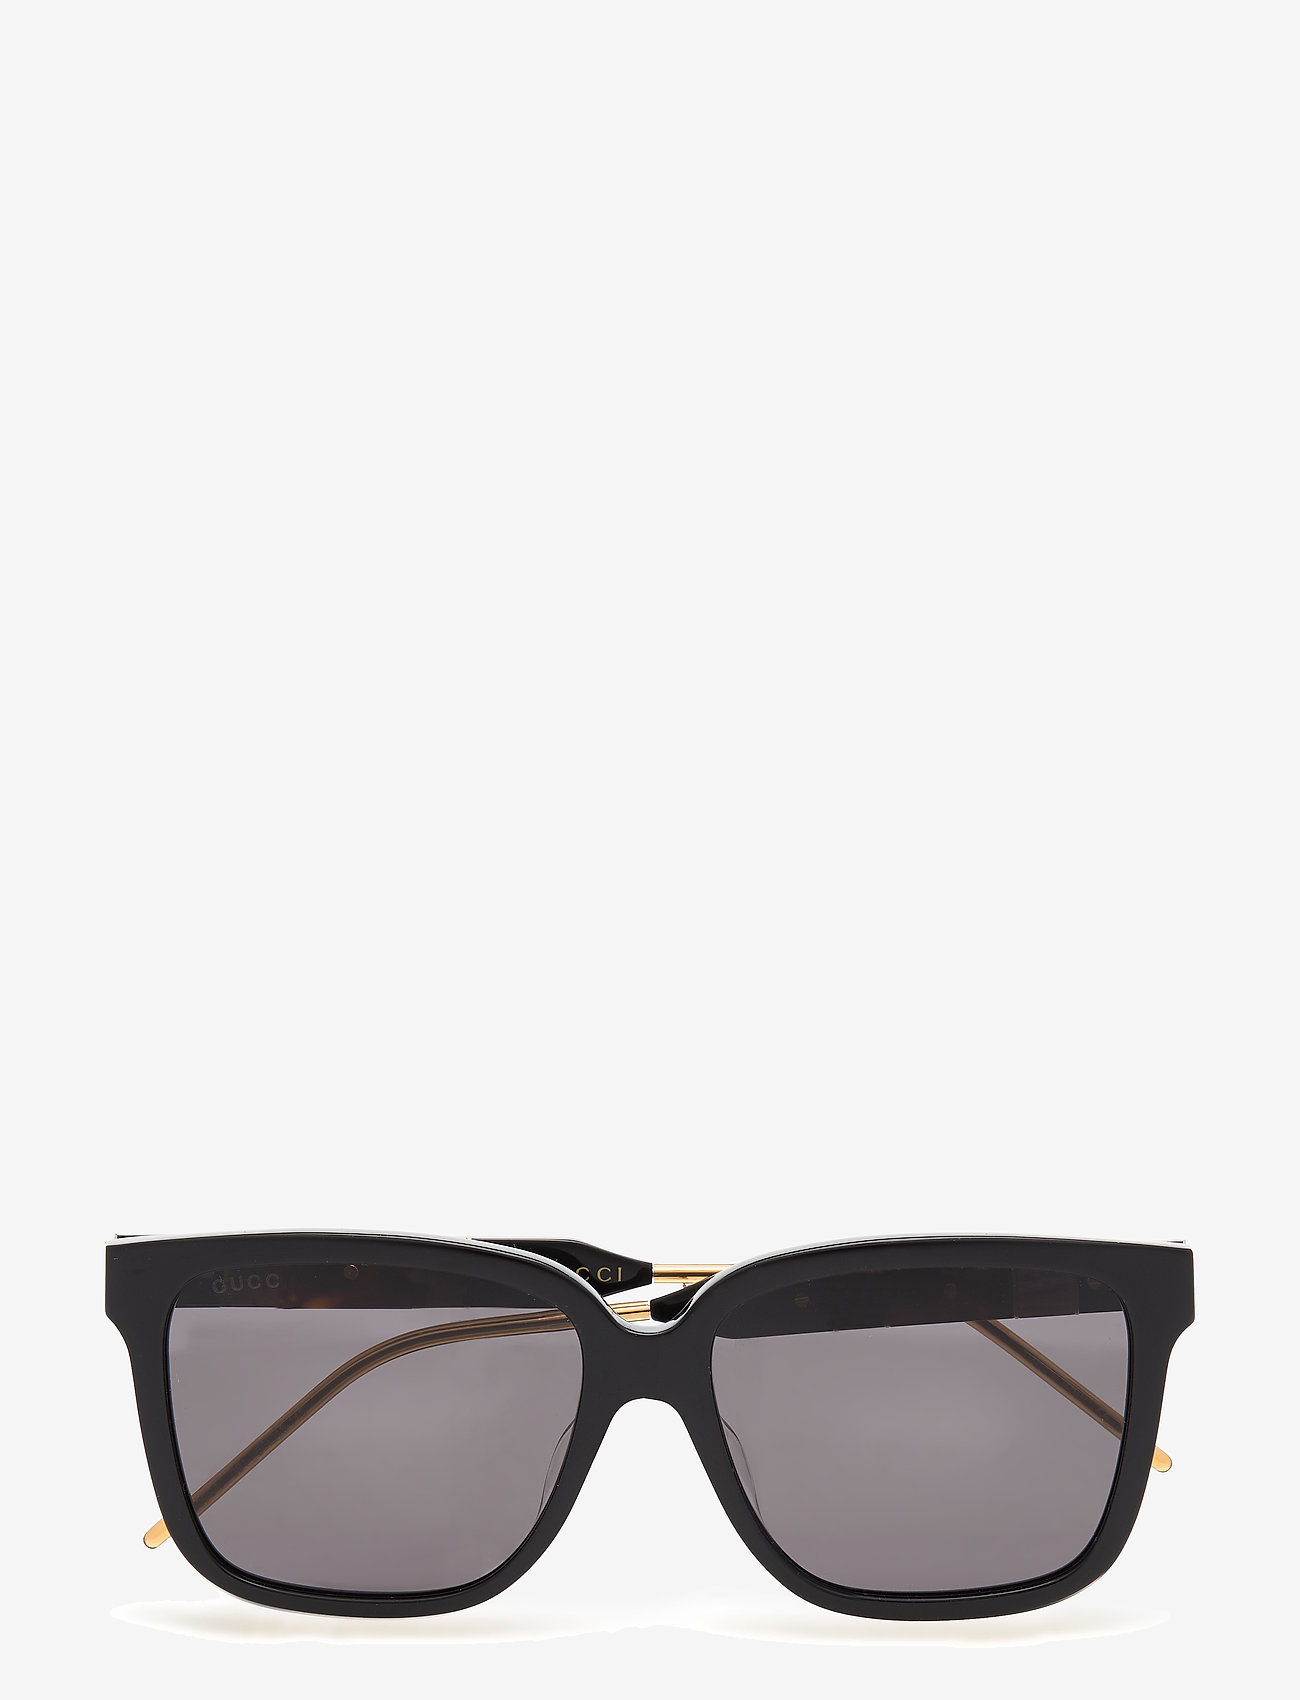 Gucci Sunglasses New Collection Hotsell, 52% OFF | lagence.tv